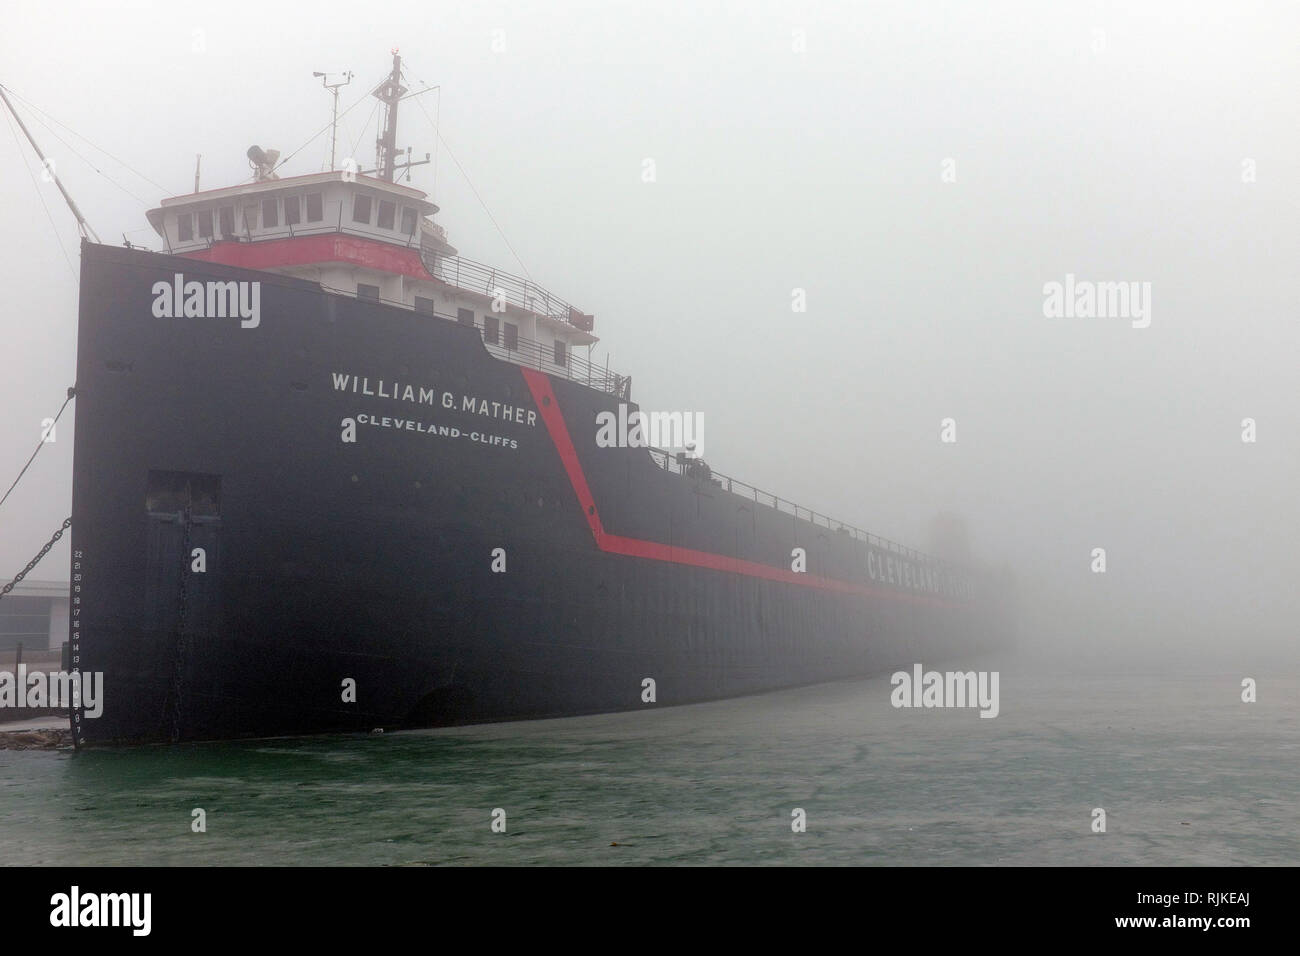 Cleveland, Ohio, USA. 6th Feb, 2019.  The William G. Mather Cleveland Cliffs ship is enshrouded in winter fog whie it sits in the iced-over North Coast Harbor. Credit: Mark Kanning/Alamy Live News. Stock Photo